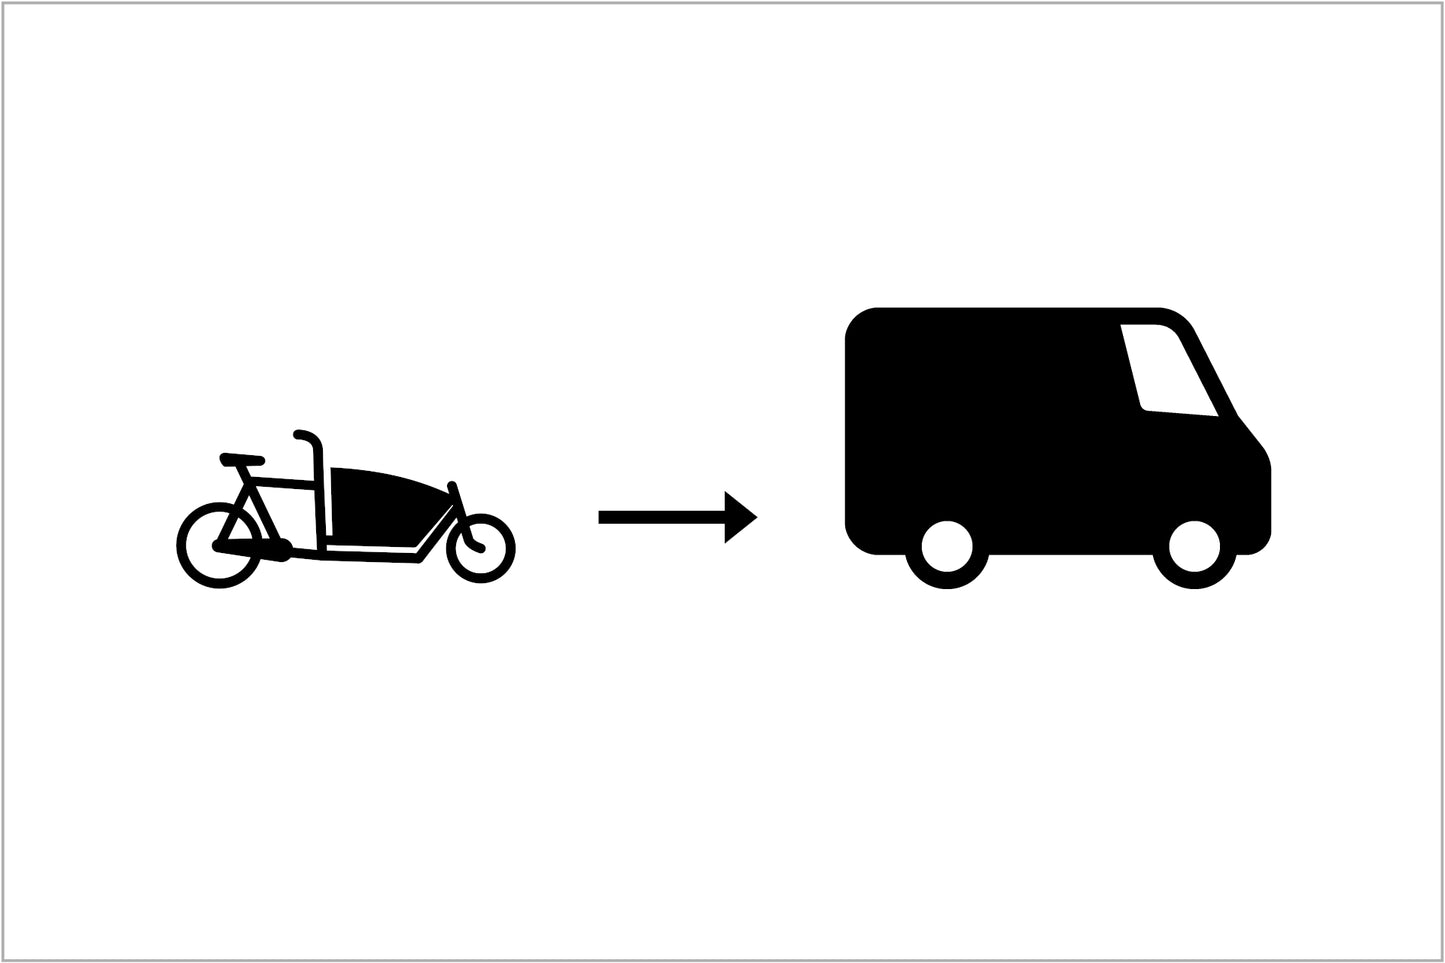 Delivery - Cargo Bike to Courier Upgrade